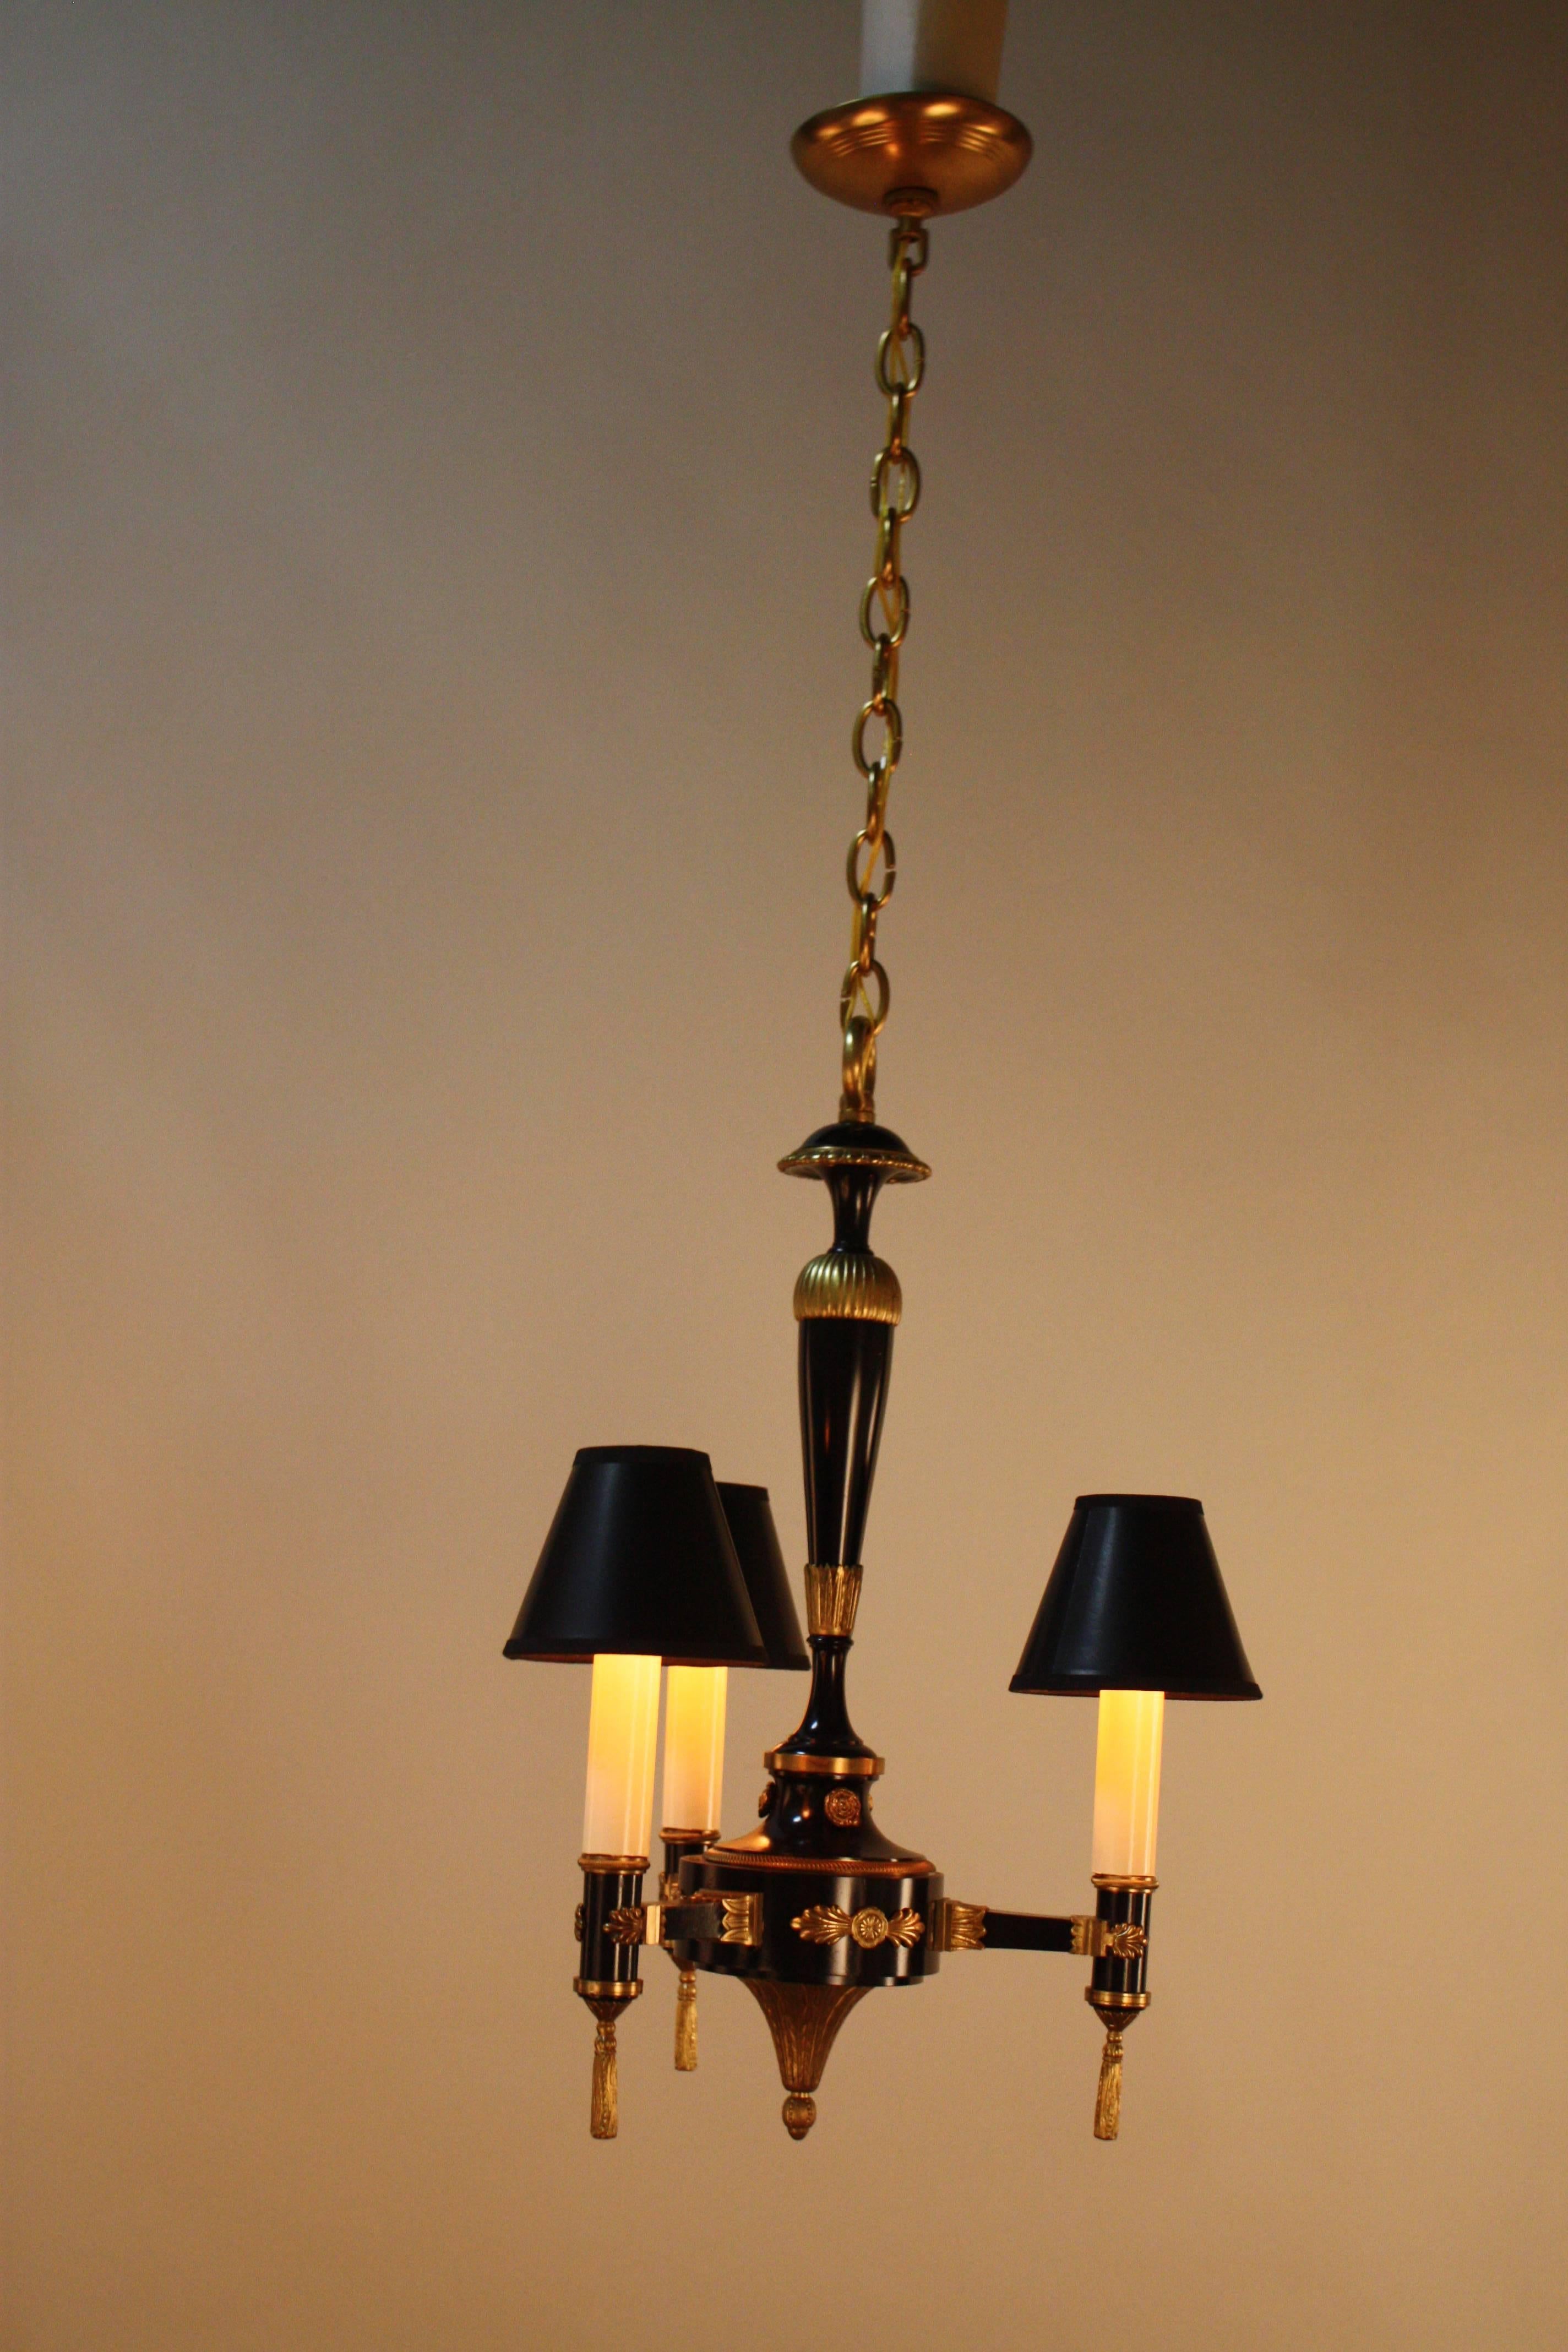 Elegant three-light chandelier. This bronze chandelier has been lacquered with golden bronze decoration.
The minimum height fully installed with one link chain is 26